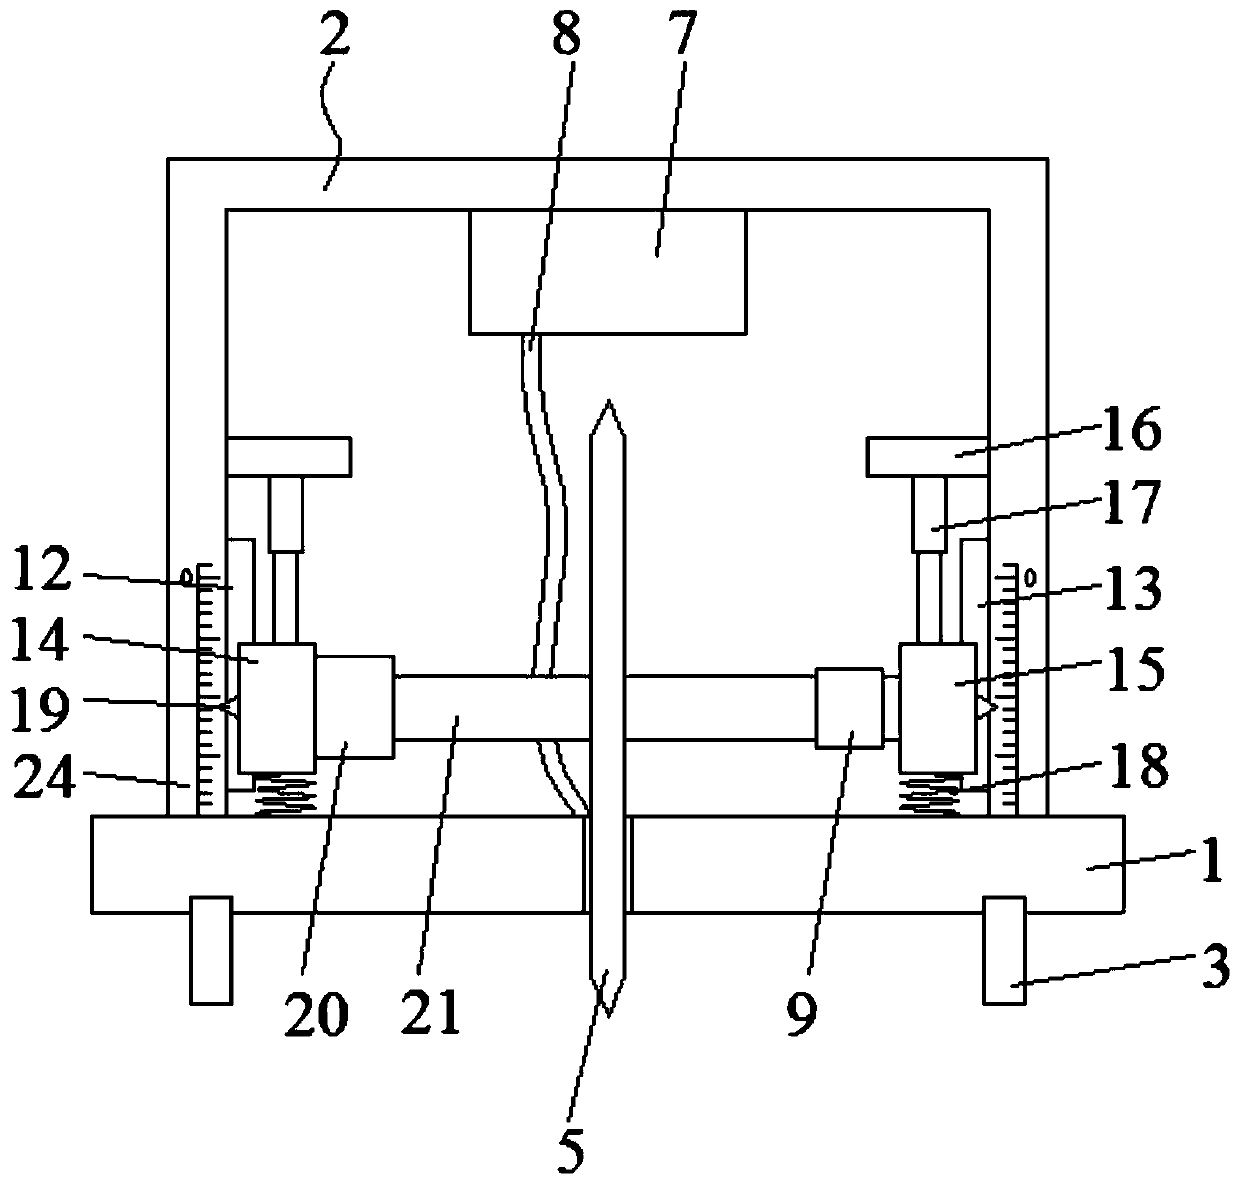 A bridge expansion joint cutting device